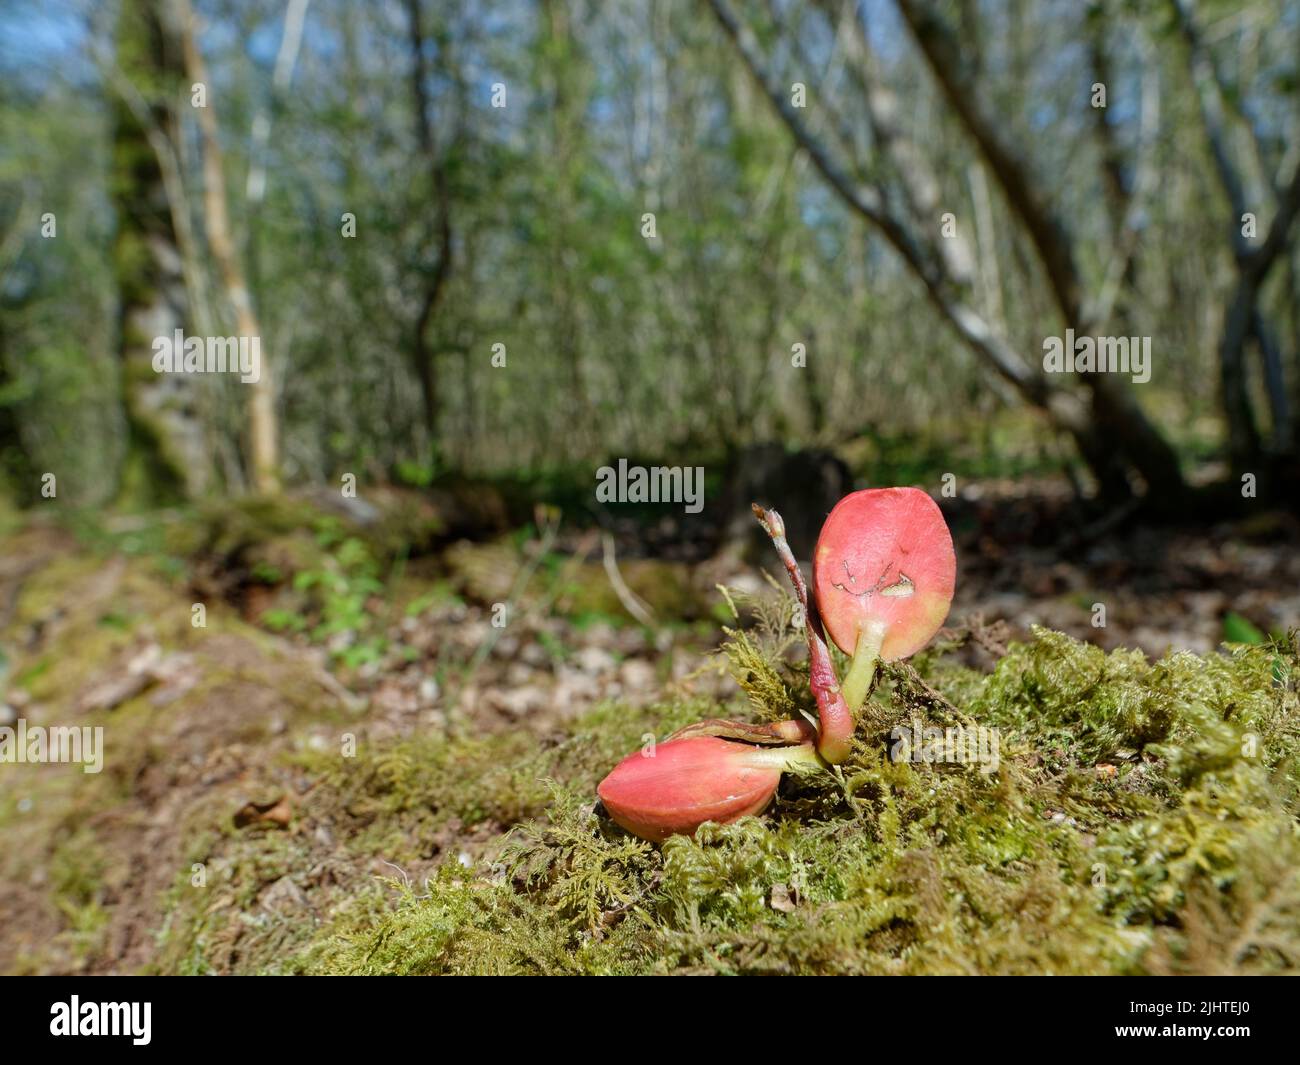 Pedunculate / English oak (Quercus robur) seedling growing from an acorn with red cotyledons visible, GWT Lower Woods reserve, Gloucestershire, UK Stock Photo